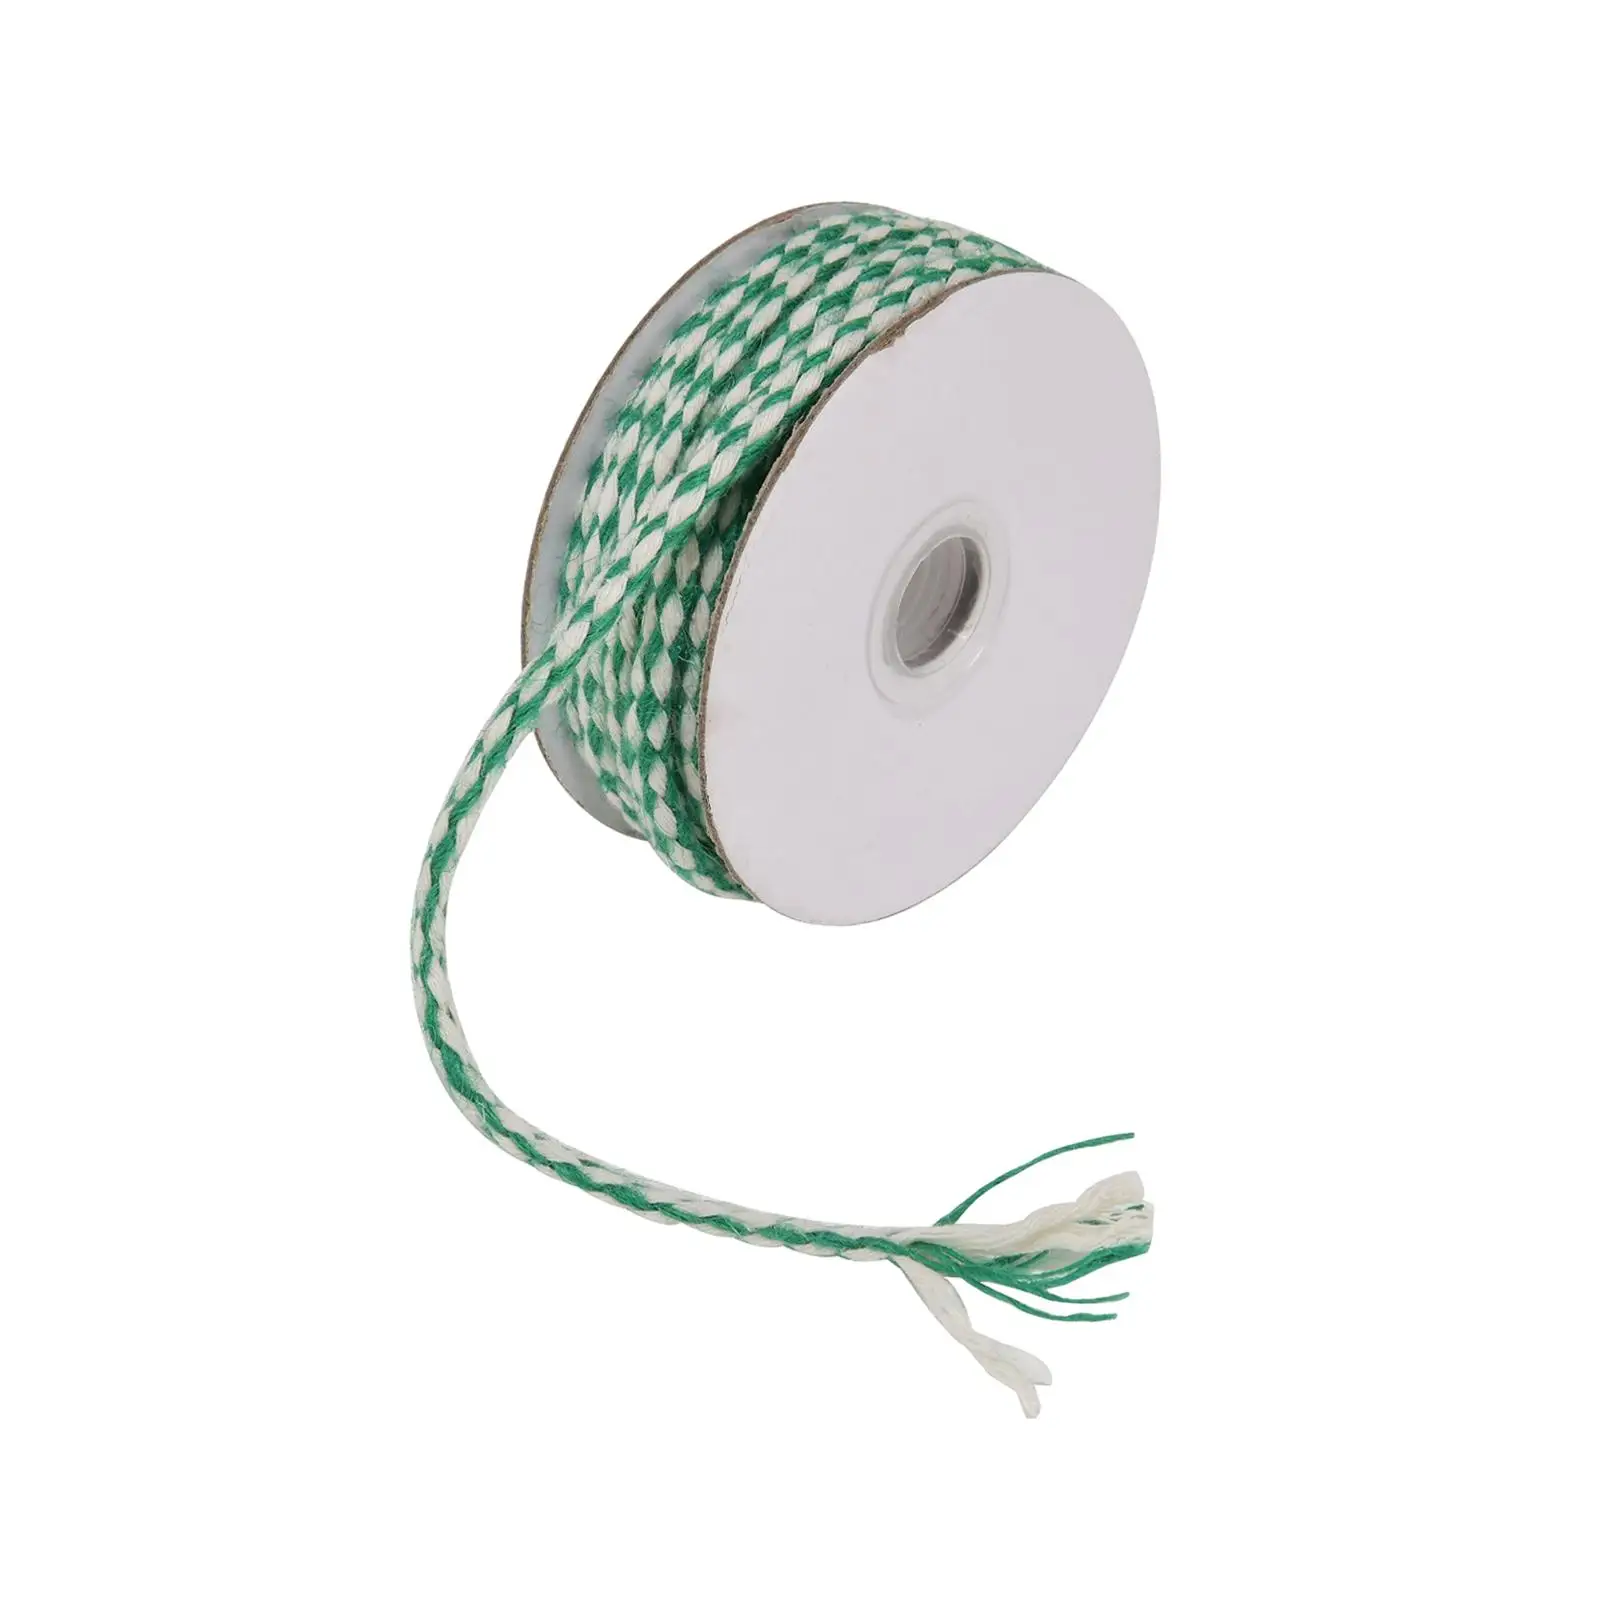 Christmas Jute String Gift Wrapping Rope Cord 10M DIY Handcraft Twisted Cord,